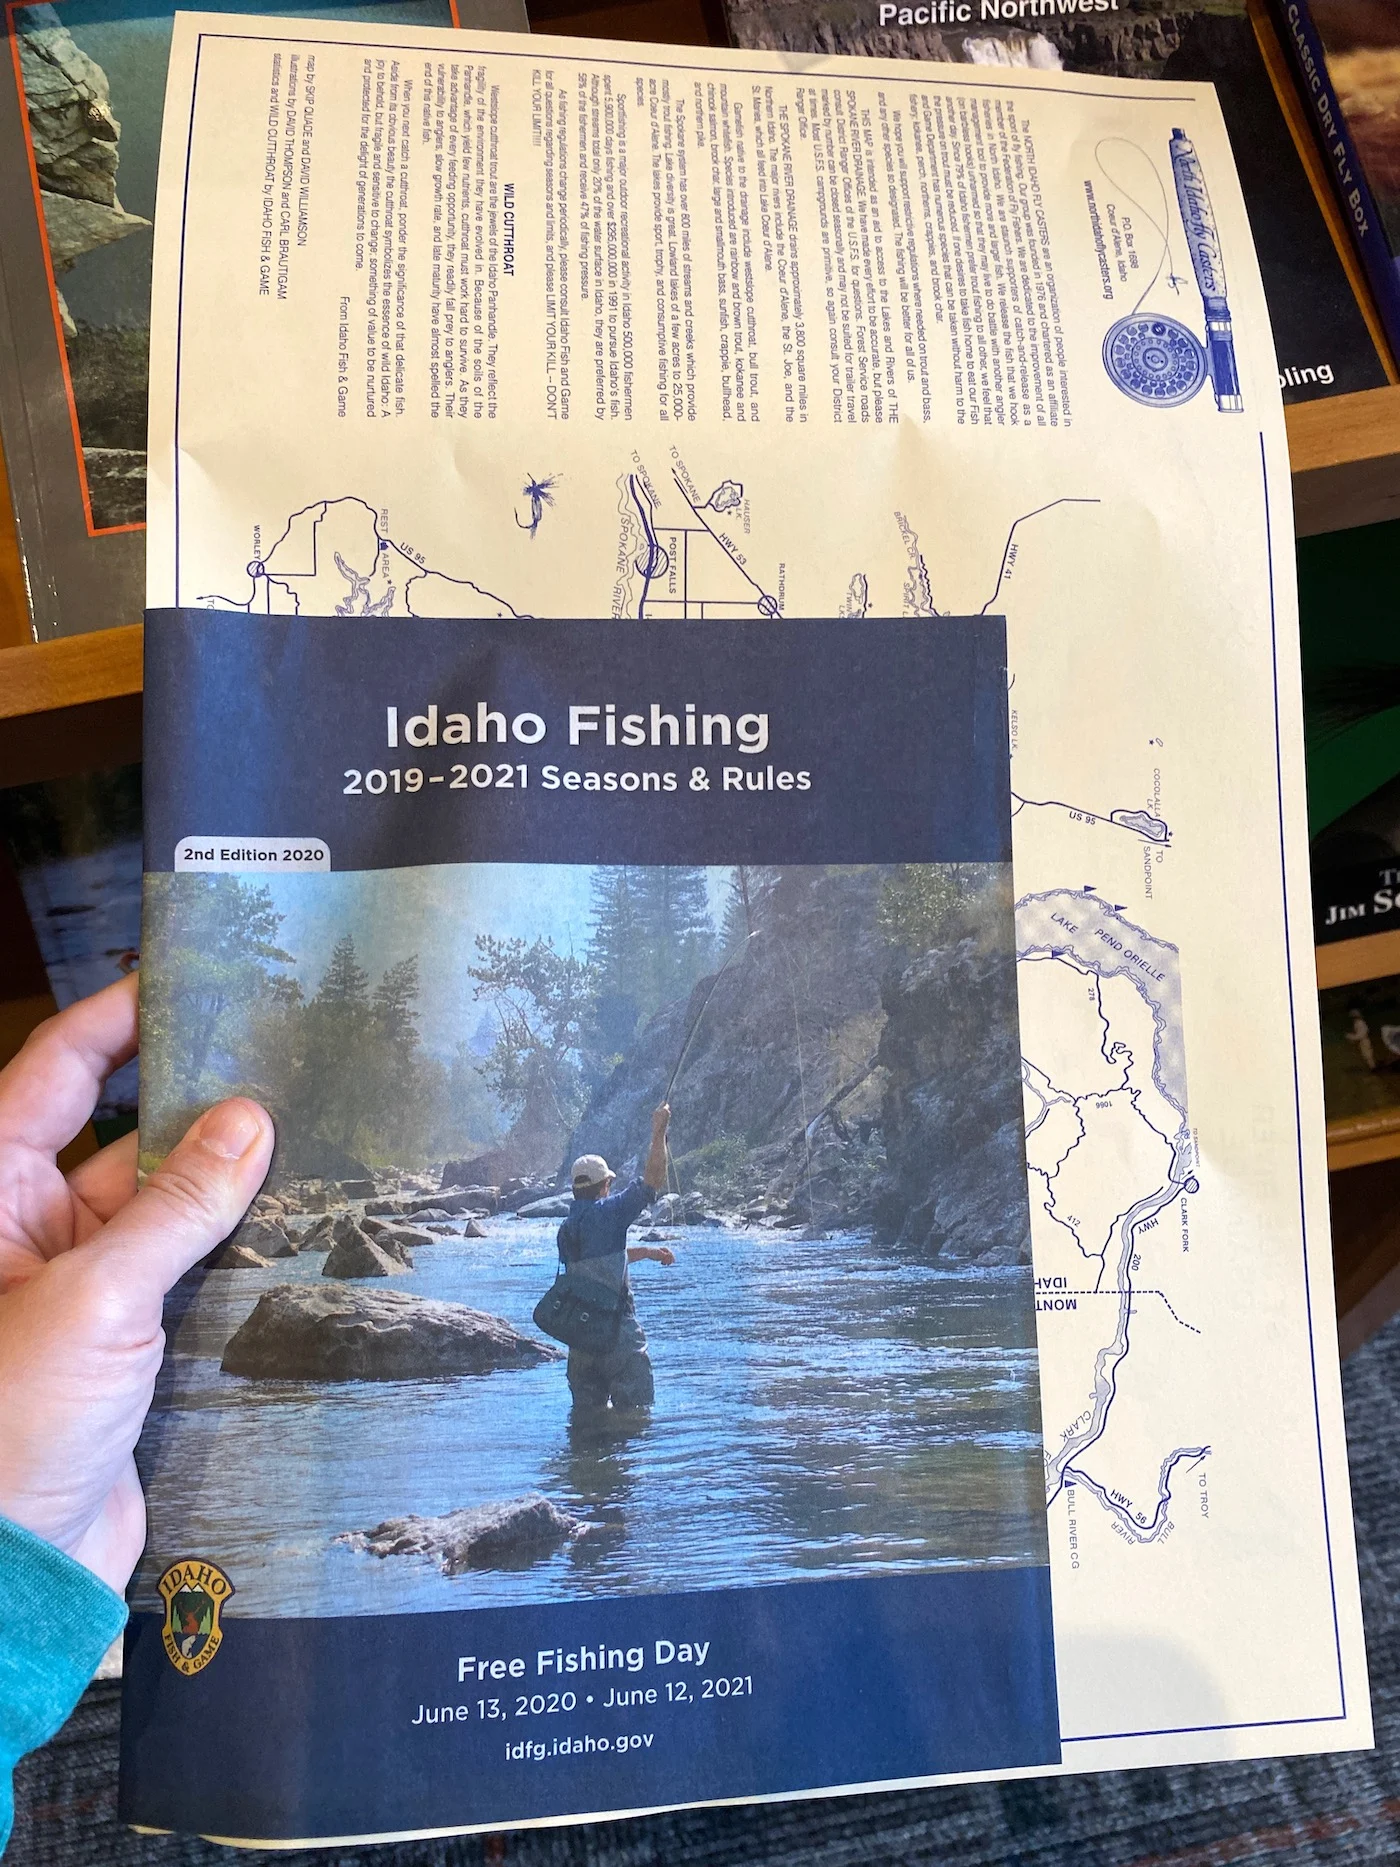 the orvis-endorsed fly fishing guide manual